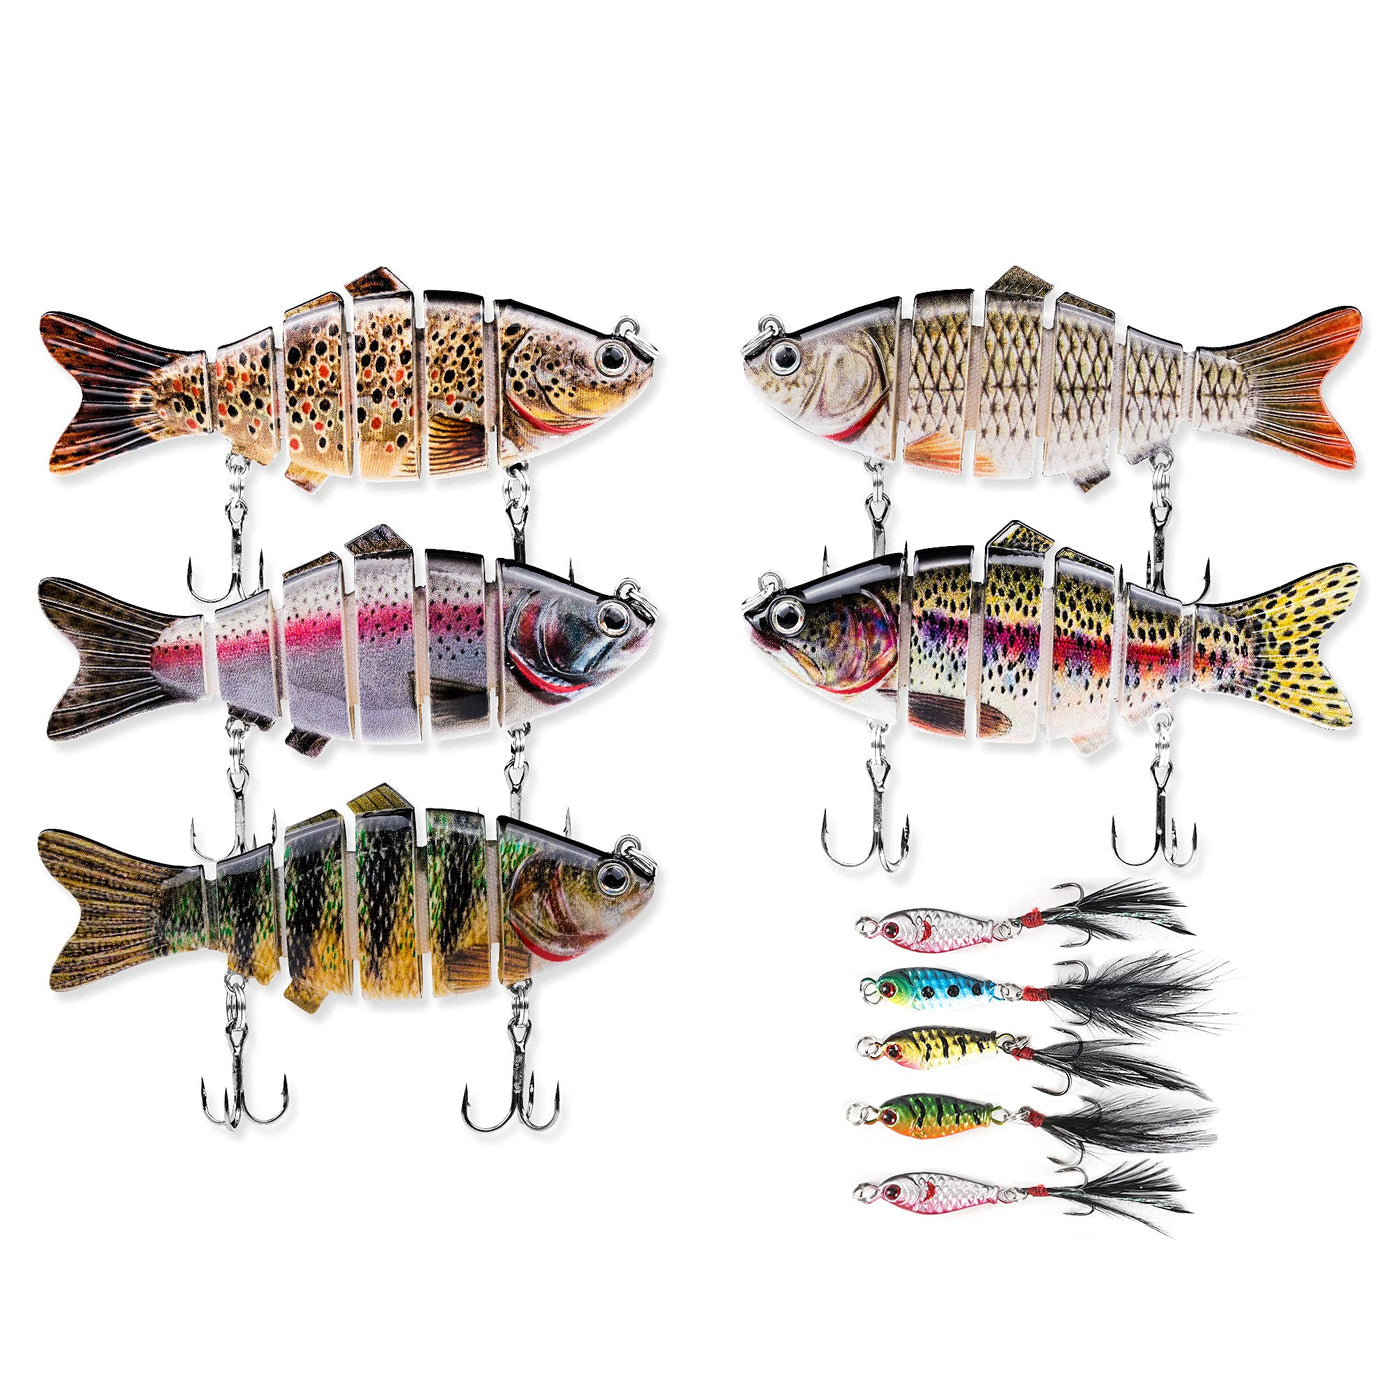 Fistron Fishing Lures for Bass Bait-Trout Lures Multi Jointed Swimbaits  Lifelike Slow Sinking for Saltwater Freshwater Small Bass Lures Kit